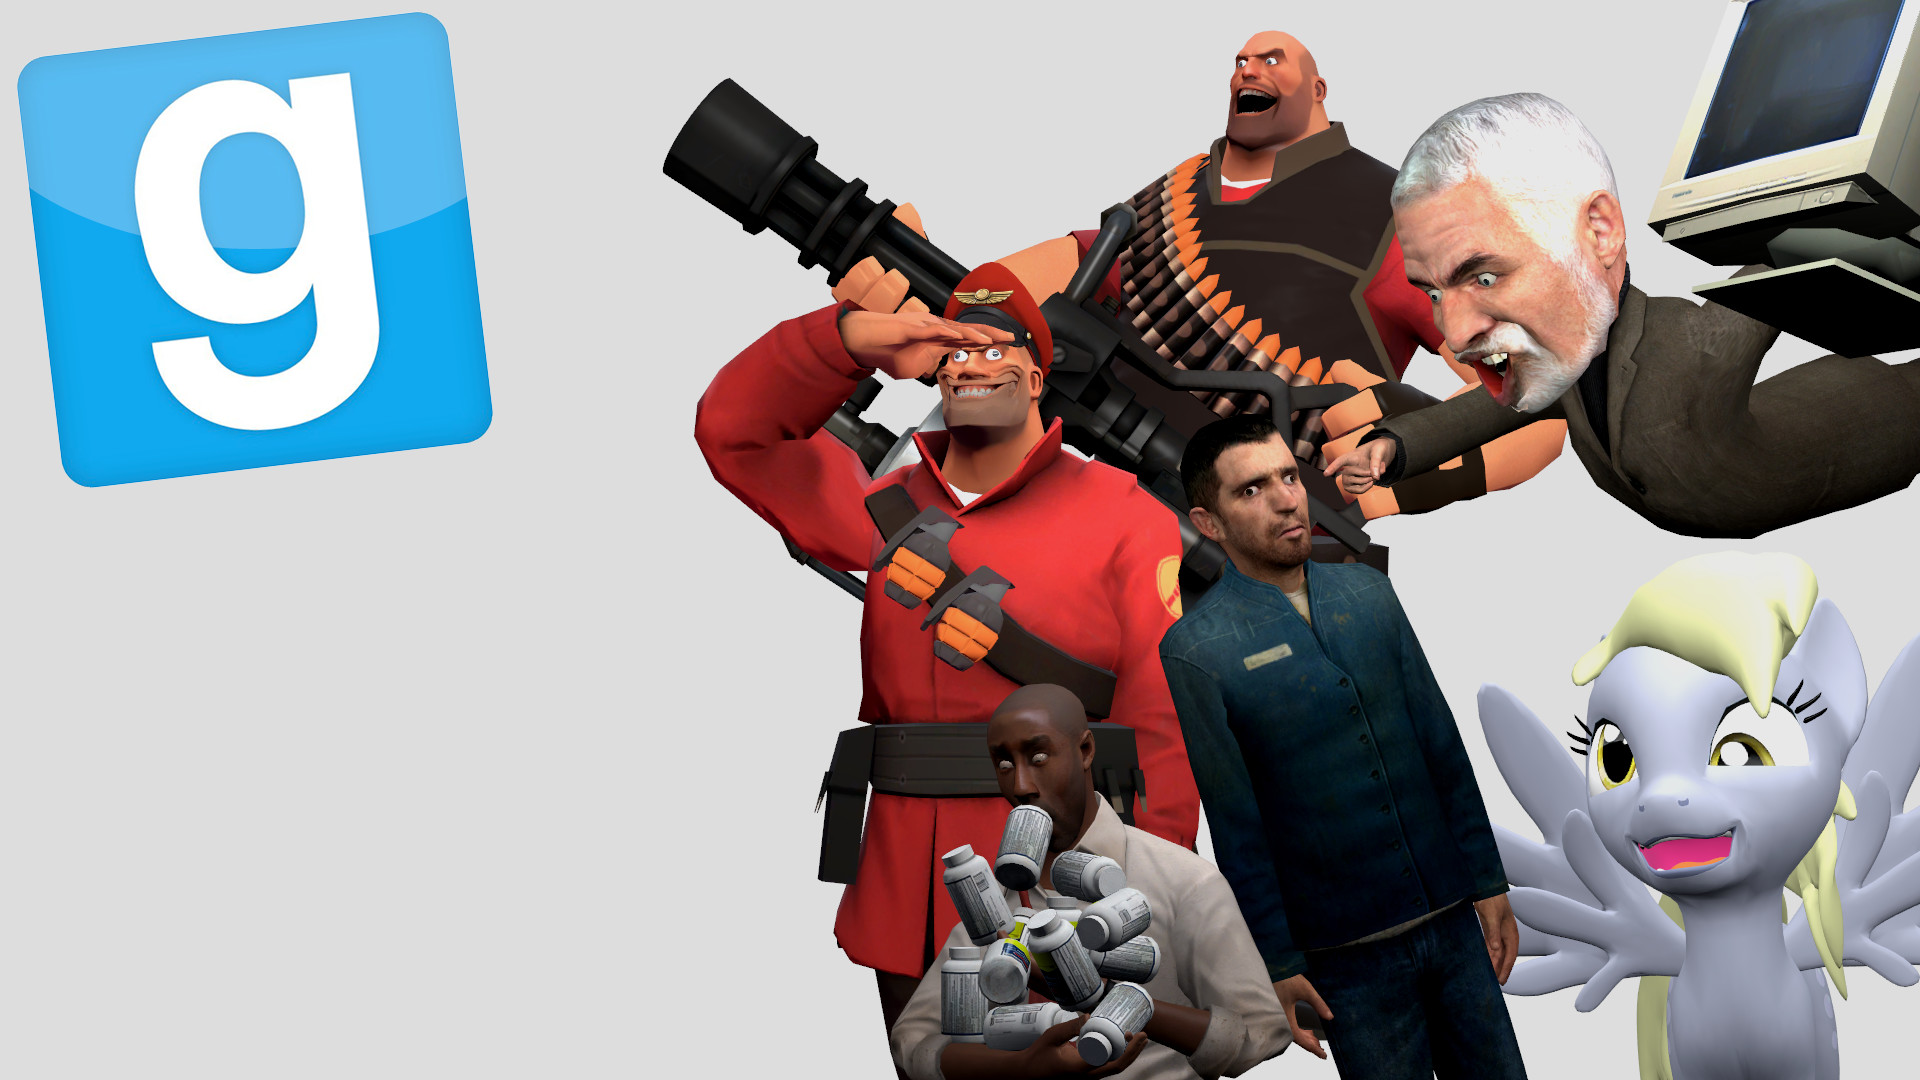 Gmod Wallpapers.